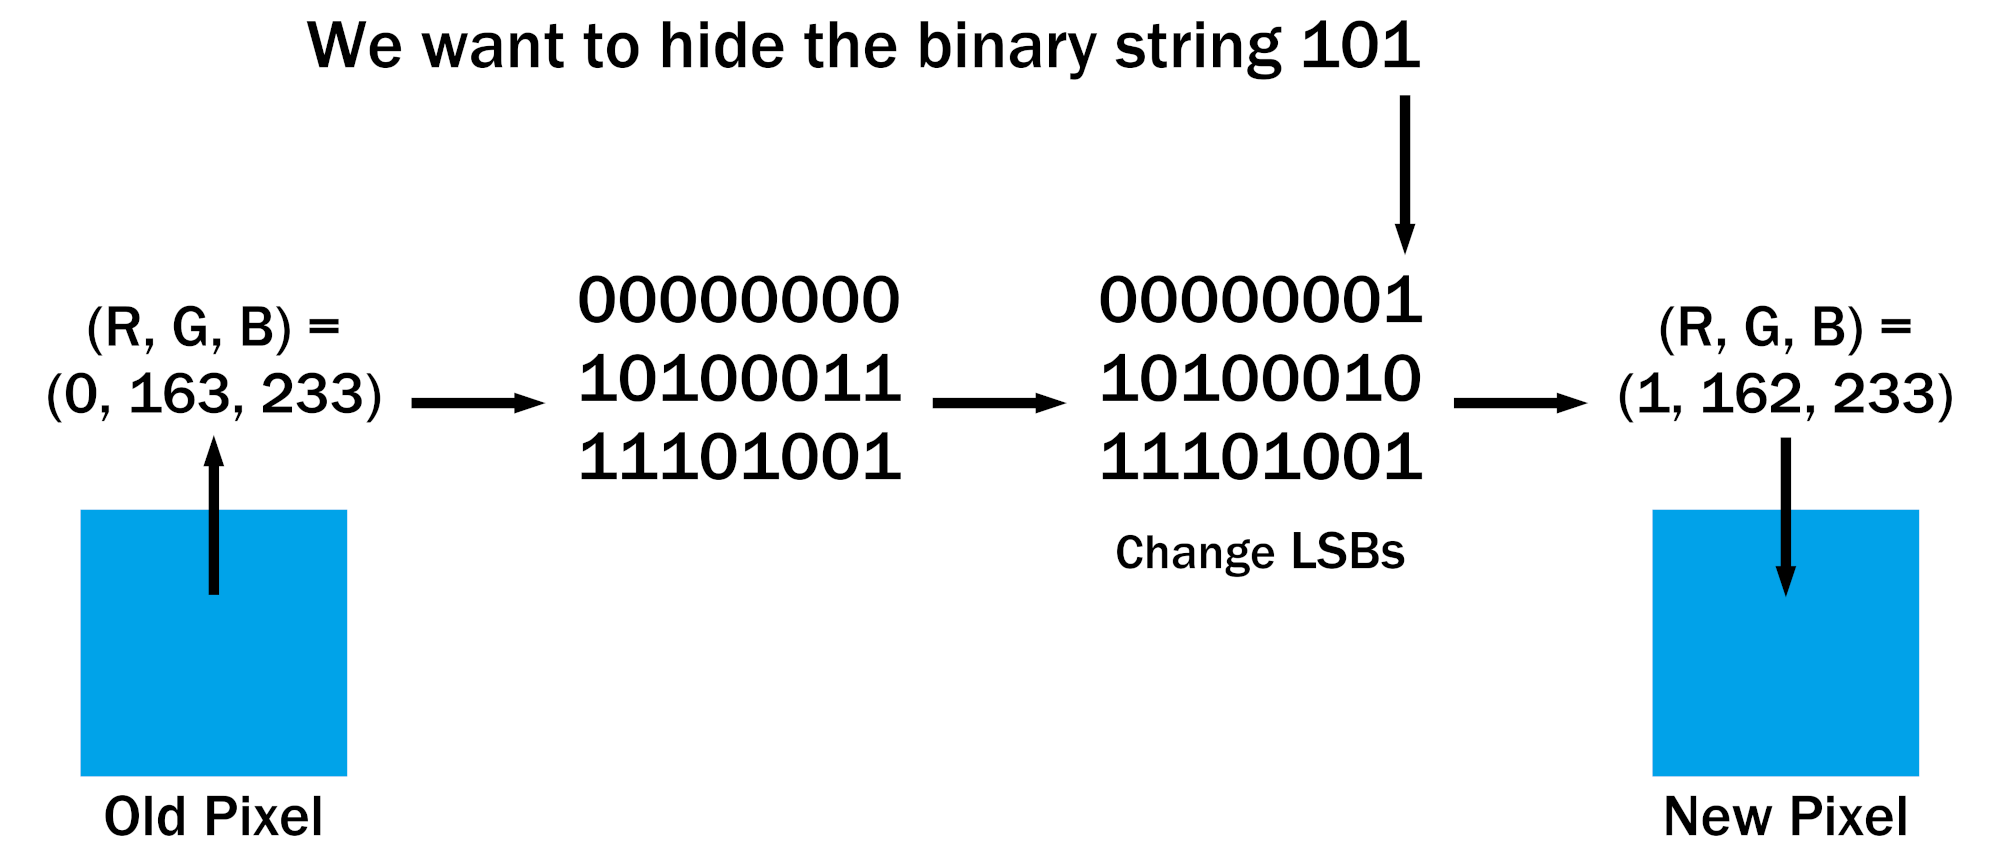 We can hide the binary string 101 in the LSBs of a 0 red, 163 green, and 233 blue pixel. Afterwards, it becomes 1
red, 162 green, and 233 blue.